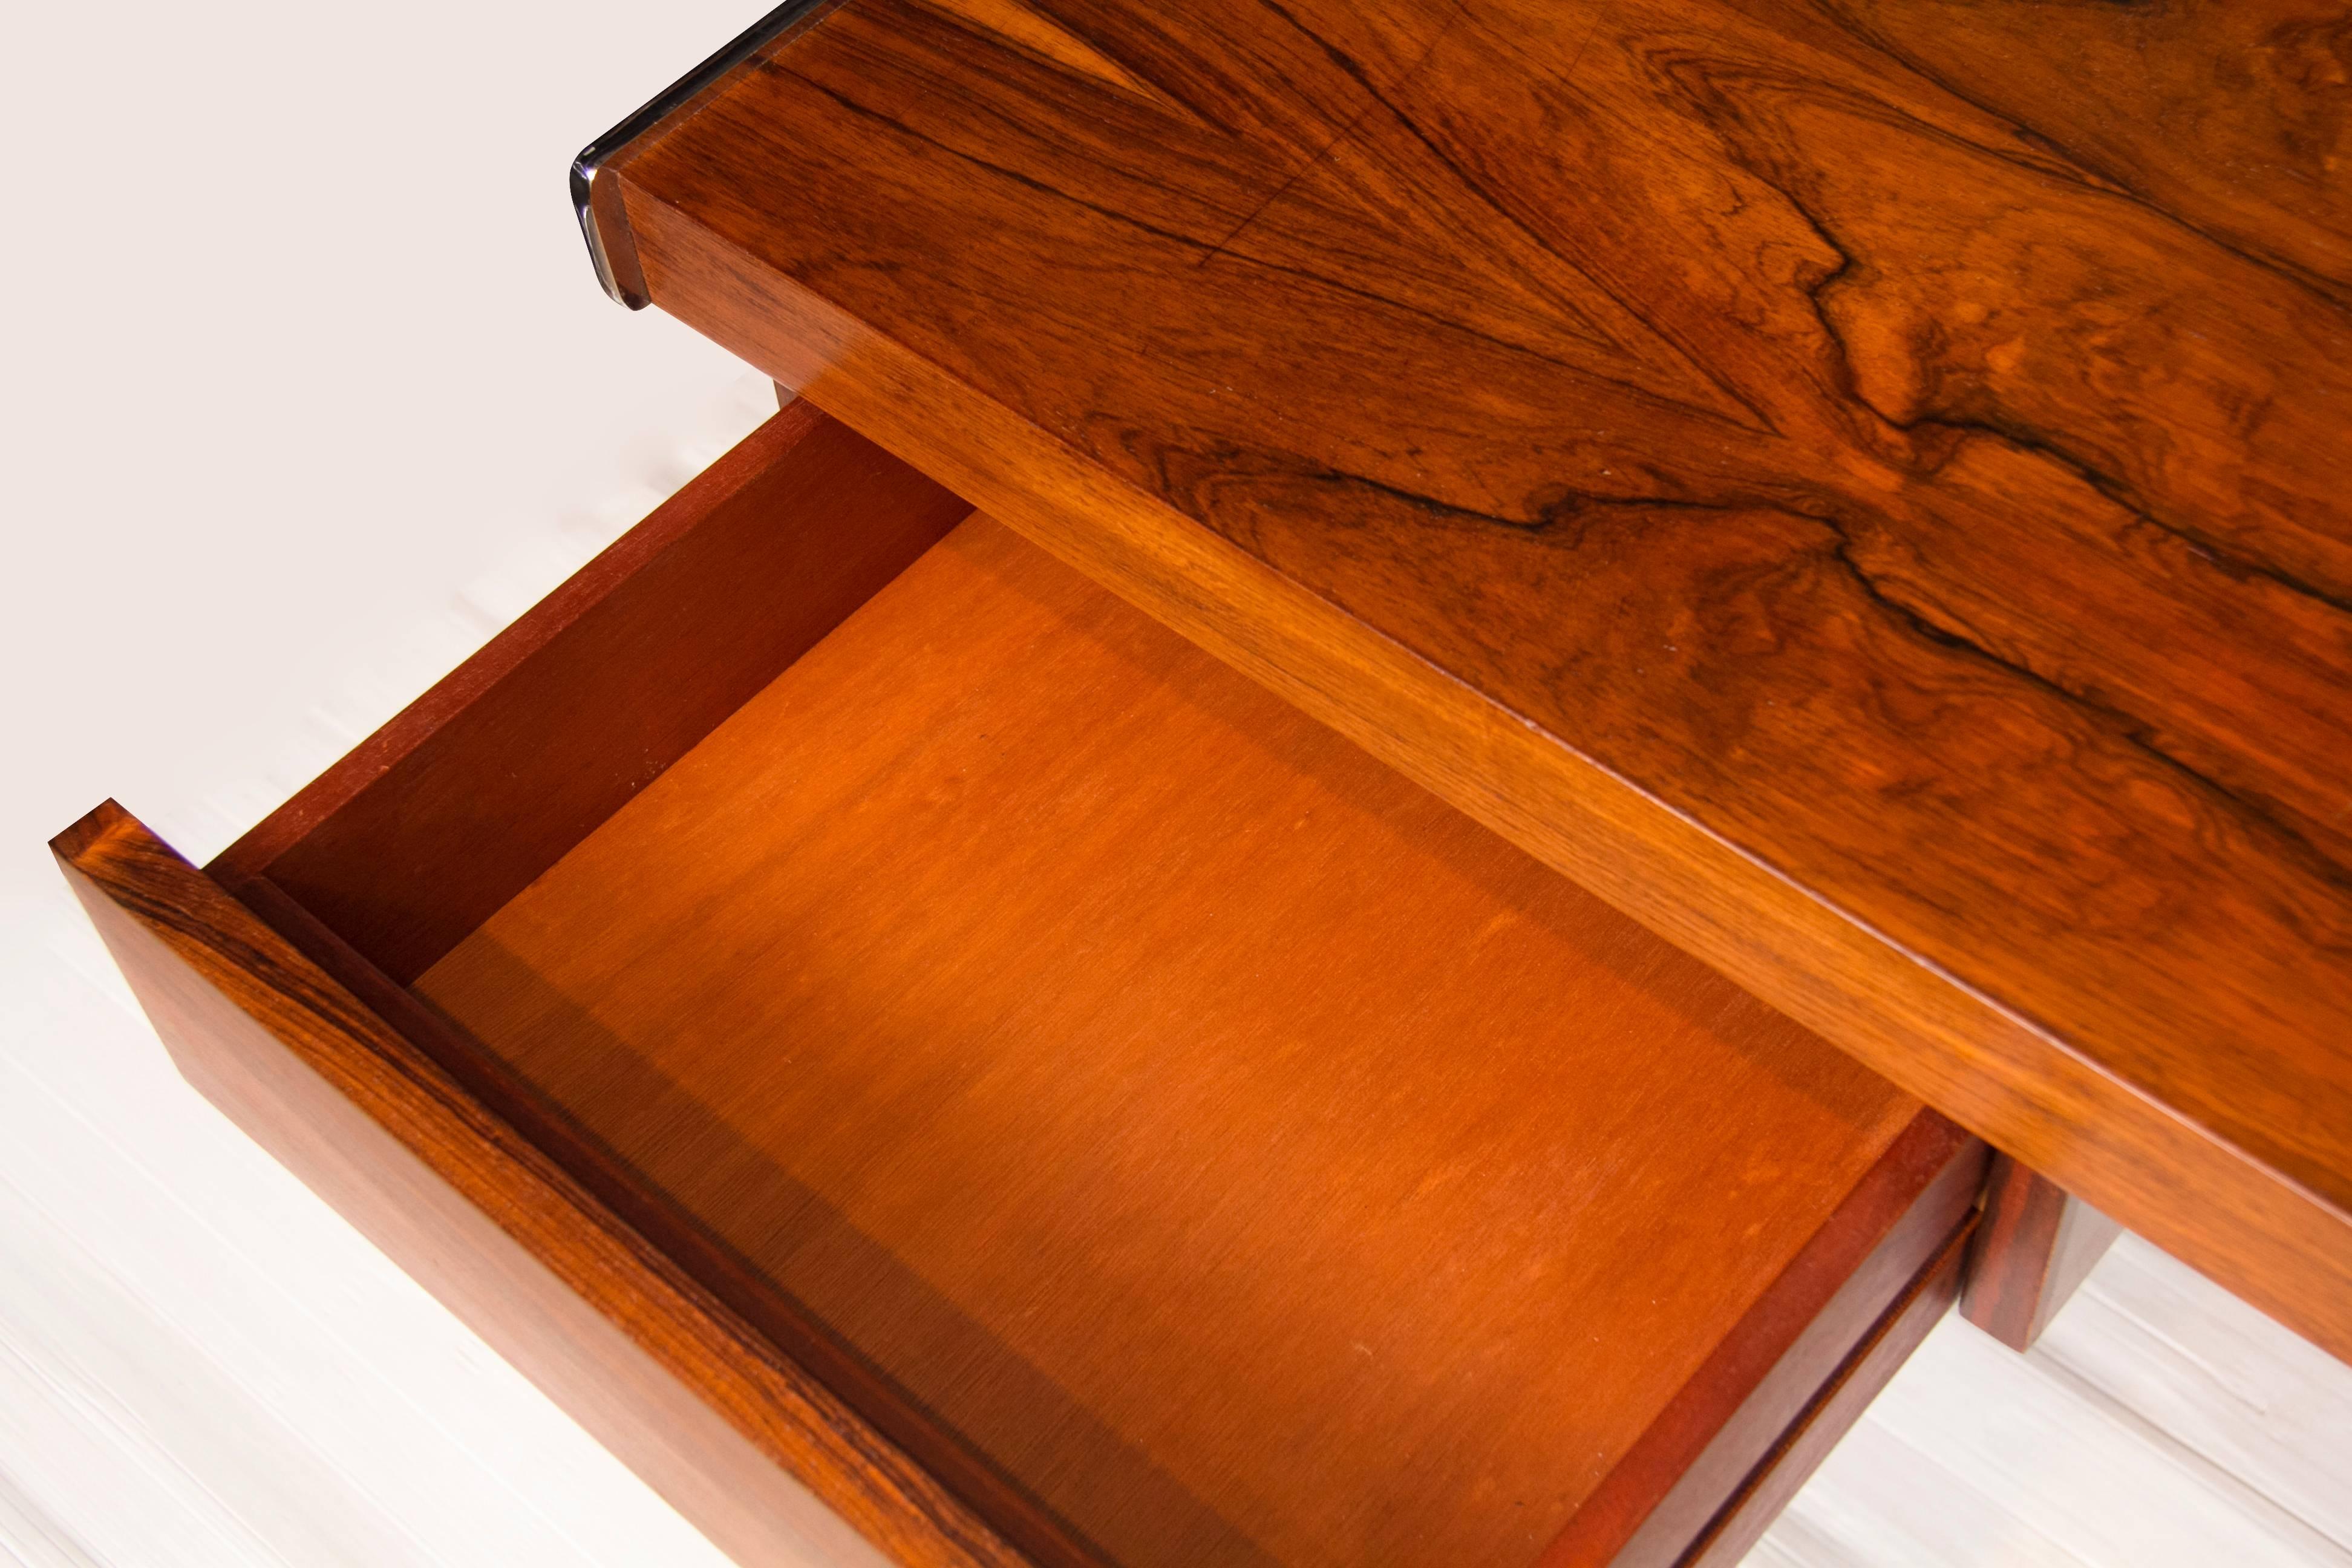 Marrow associates rosewood desk with single drawer standing on a chrome base, designed in the 1970s by David Folker.